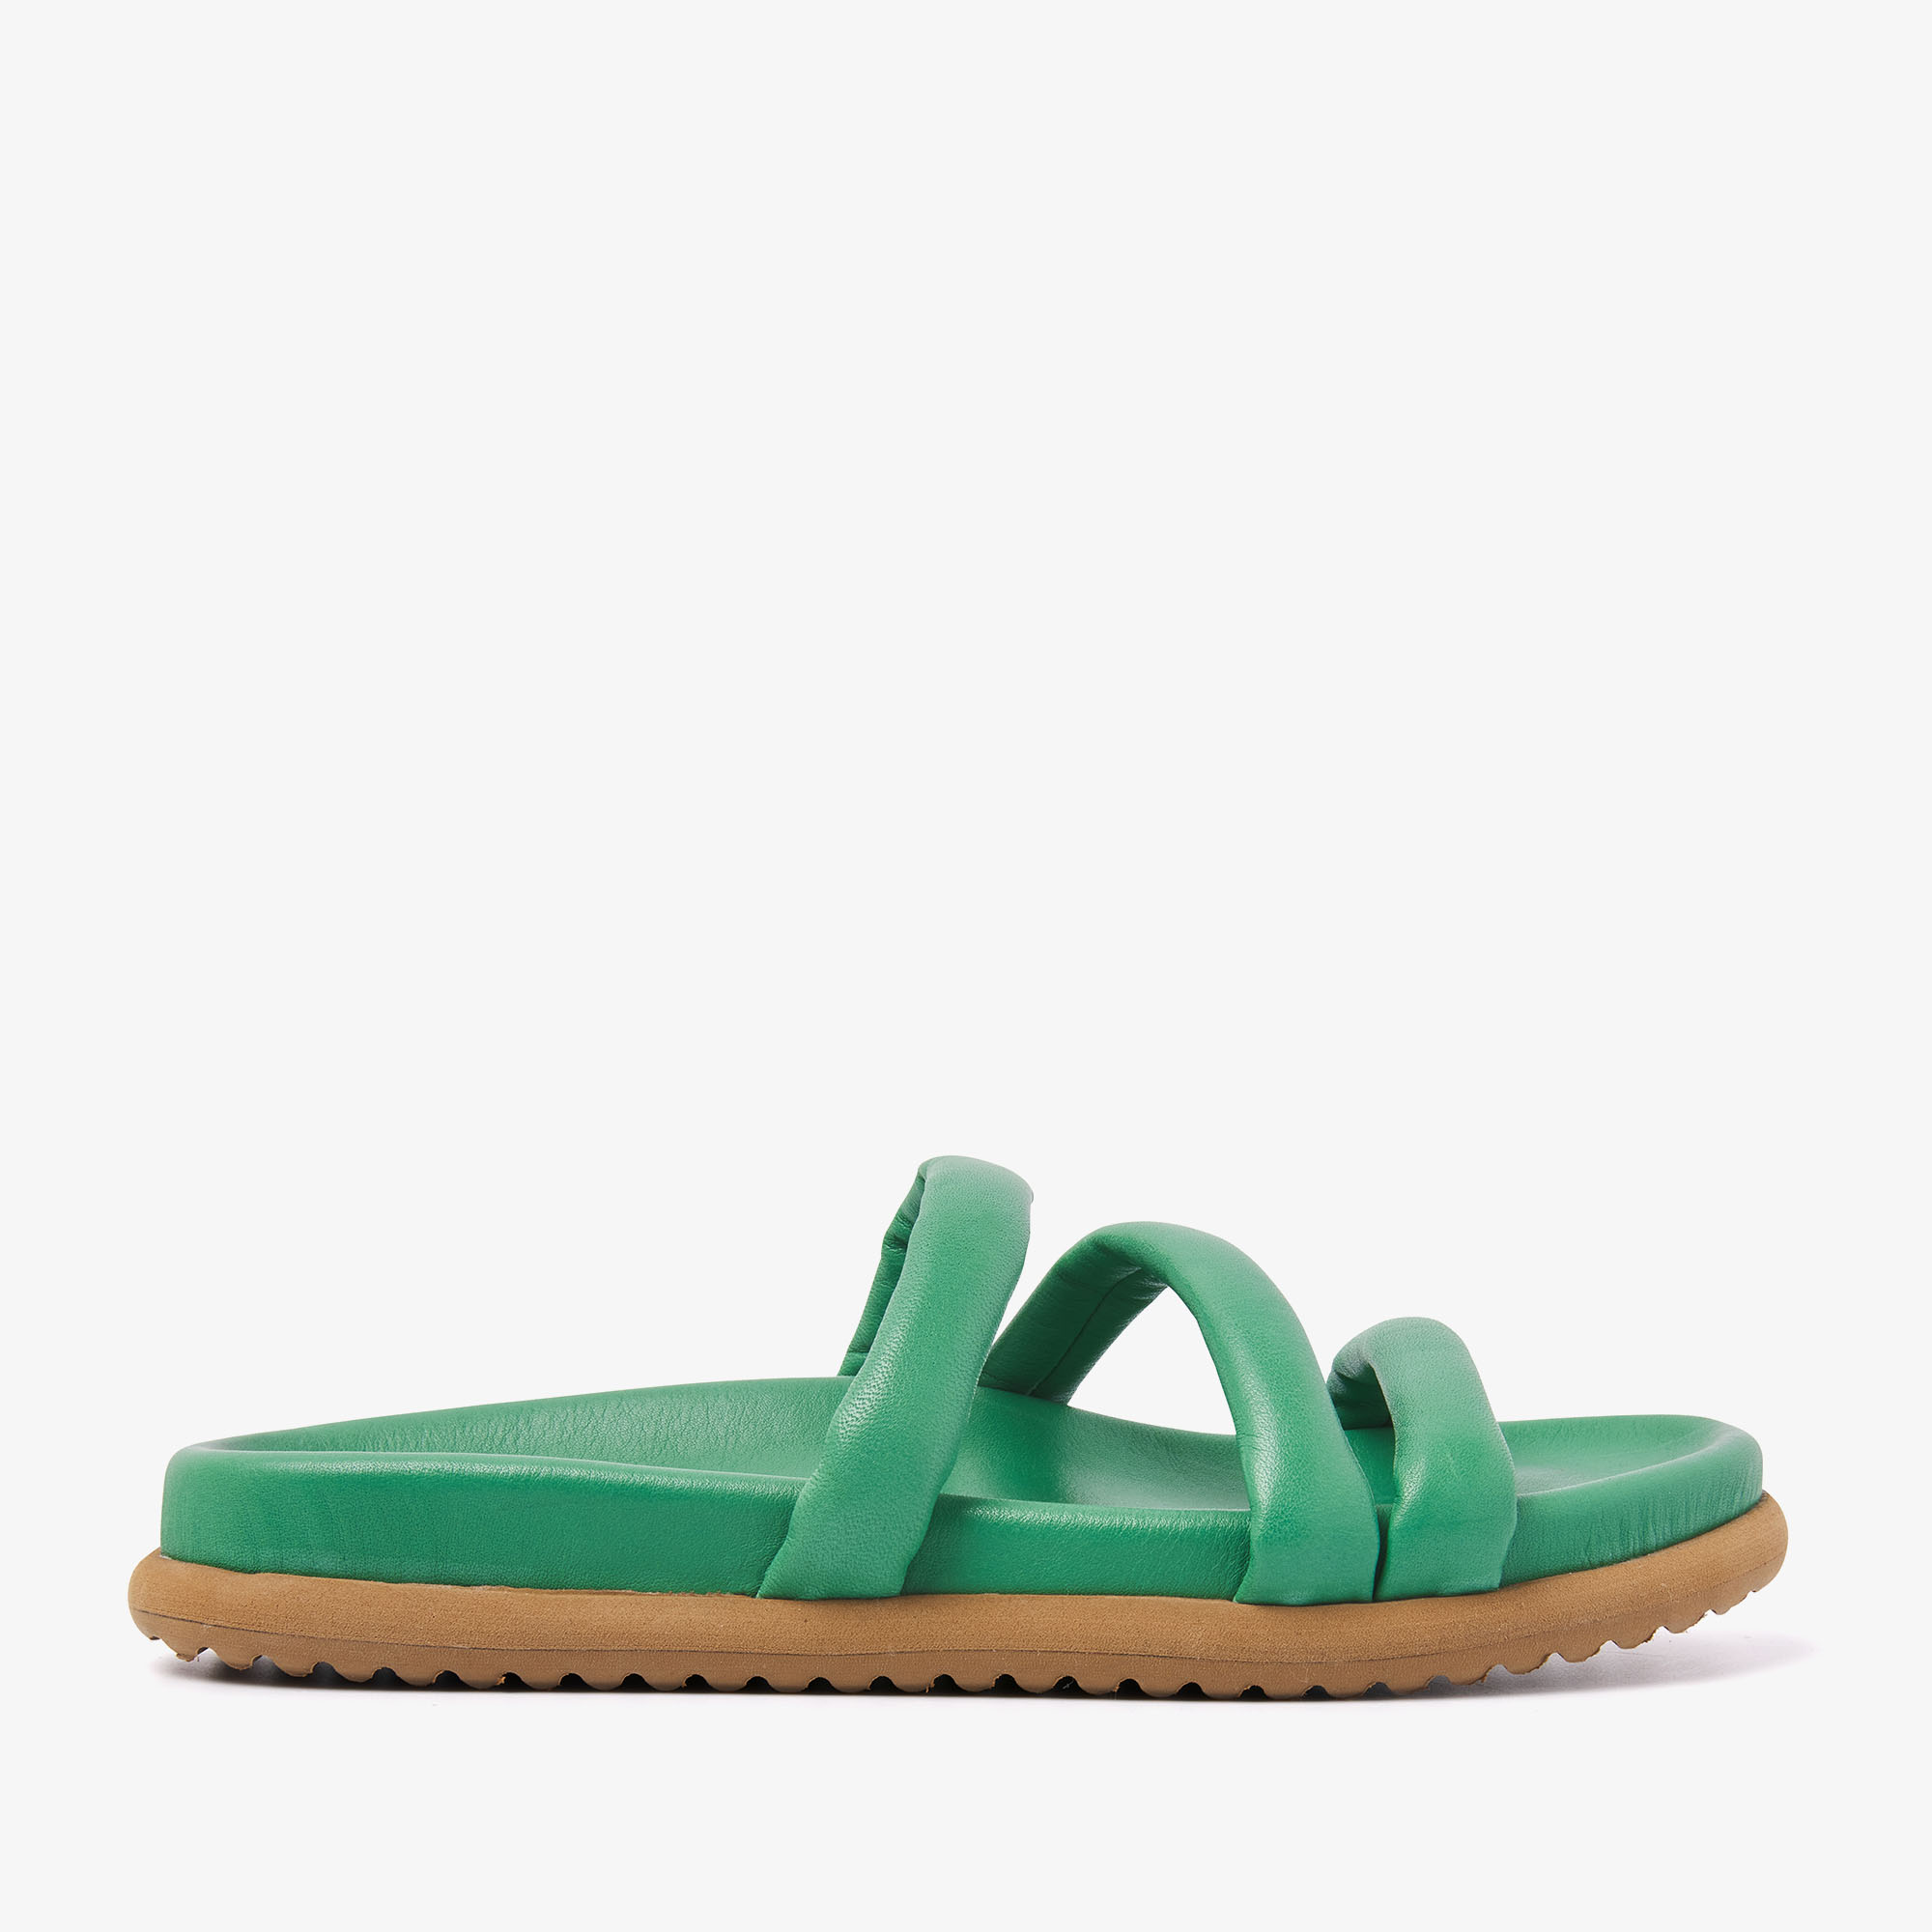 VIA VAI Candy Pop green slippers